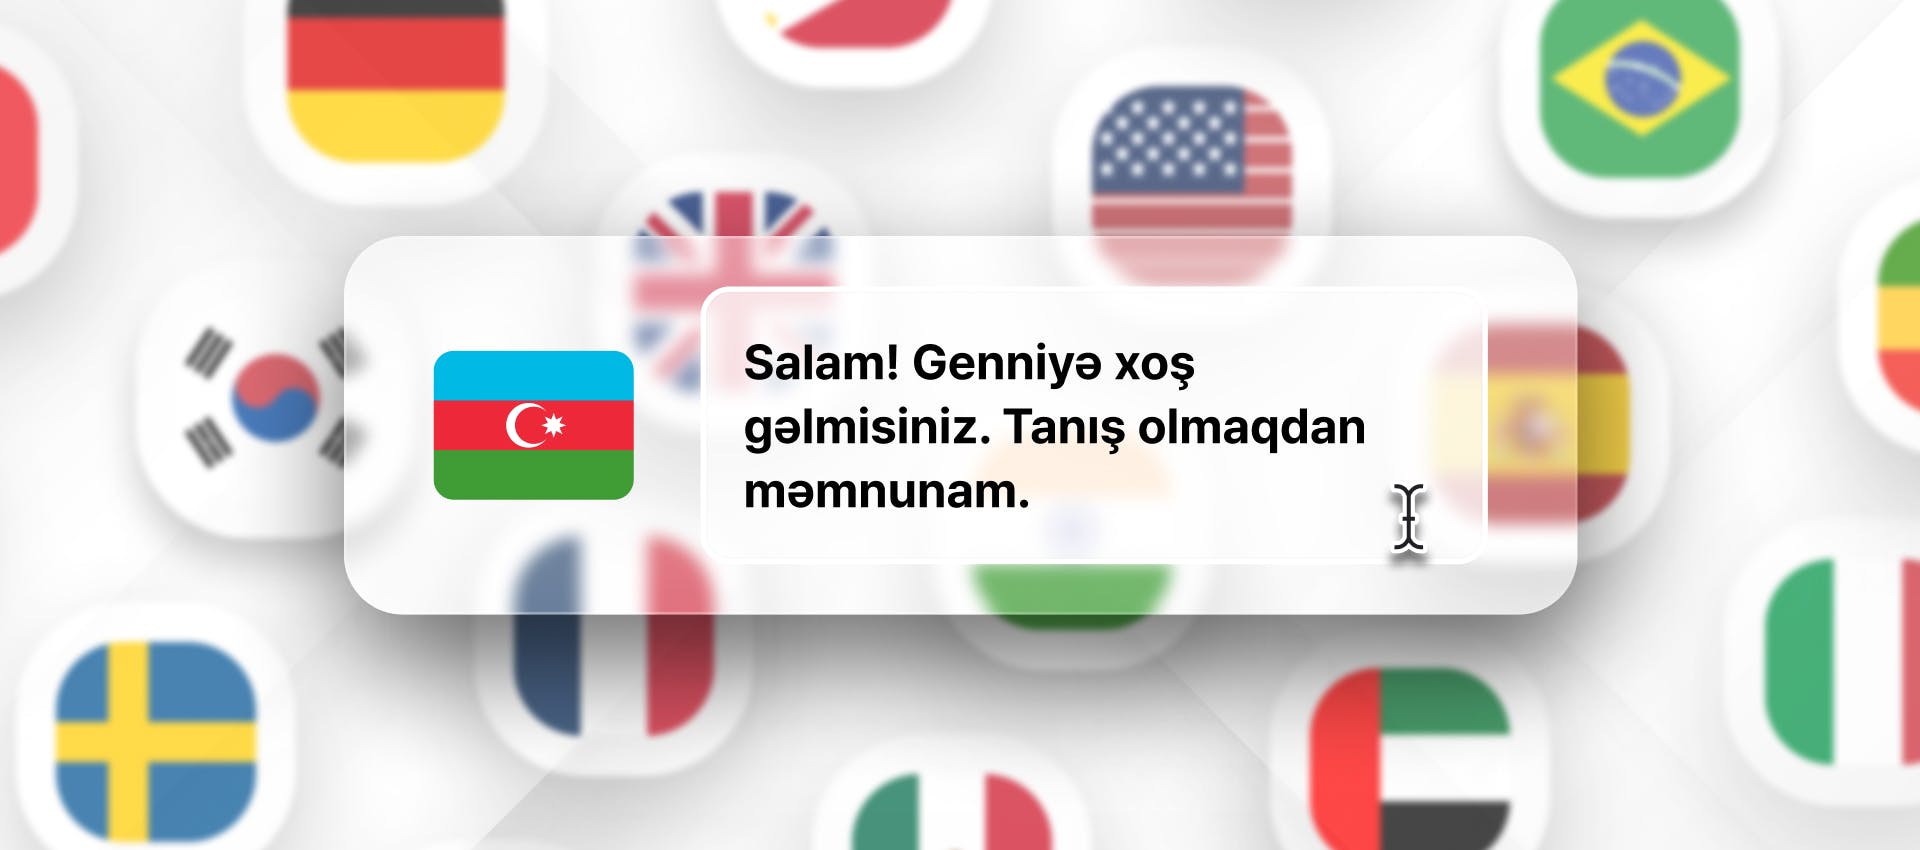 Azerbaijani phrase for Azerbaijani TTS generation with different flags in the background